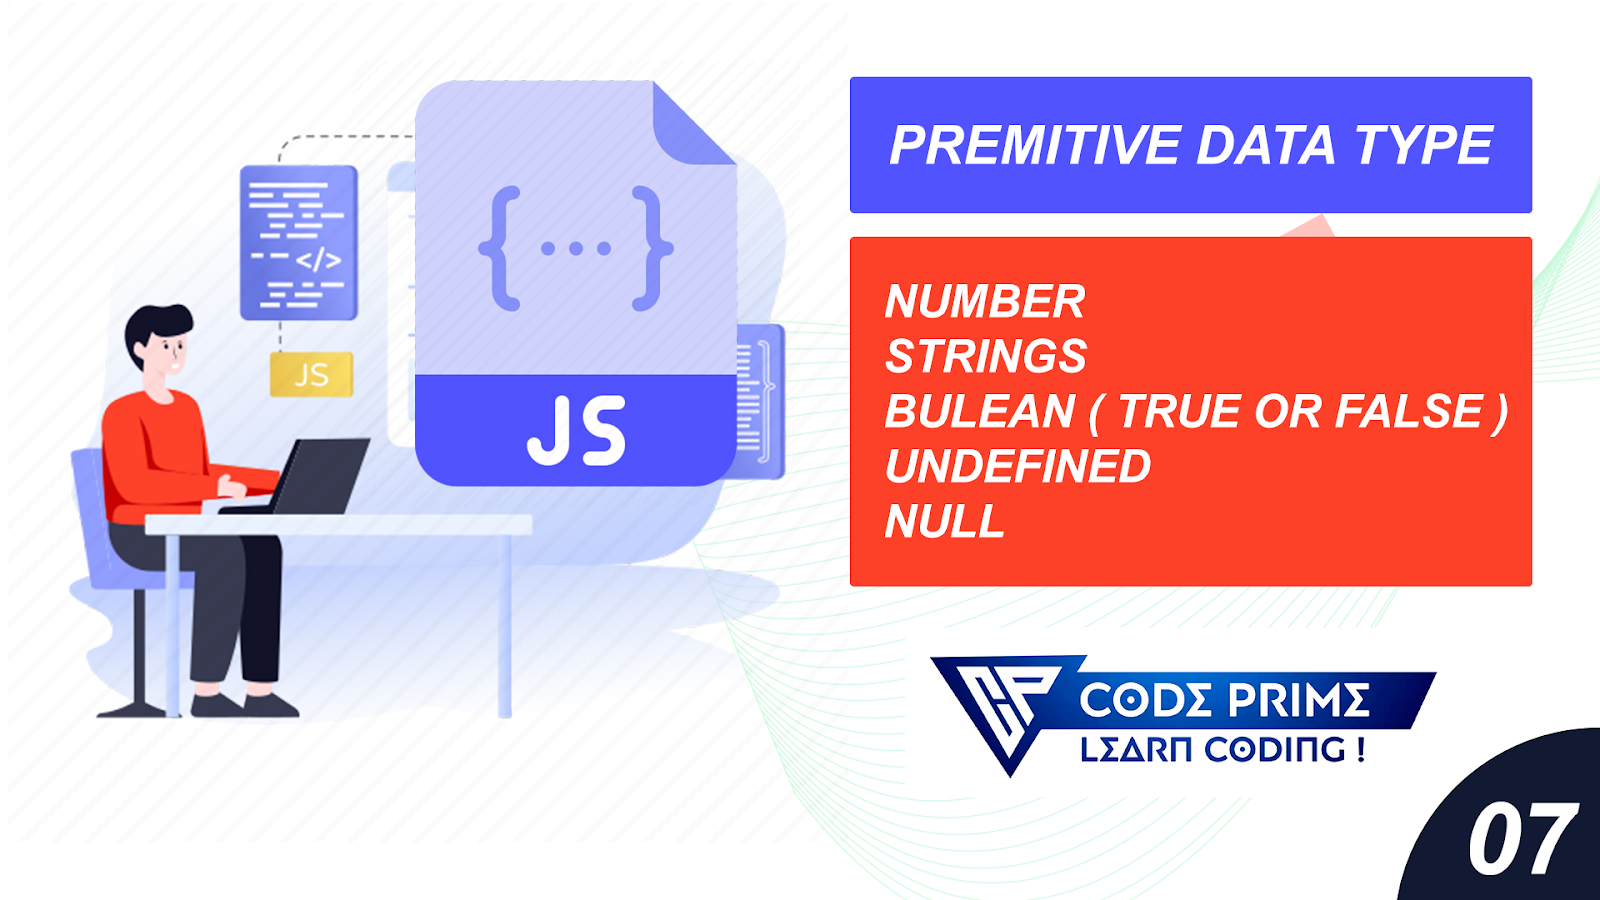 javascript,tutorial,primitive data type java,,what is primitive data type in javascript,,is string a primitive data type in ,javascript tutorial for beginners,javascript full course,Primitive Data Type Explain,Number,Strings,Bluean,Undefined,Null,, codeprime, coding tutorial, how to learn coding easy way to learn coding